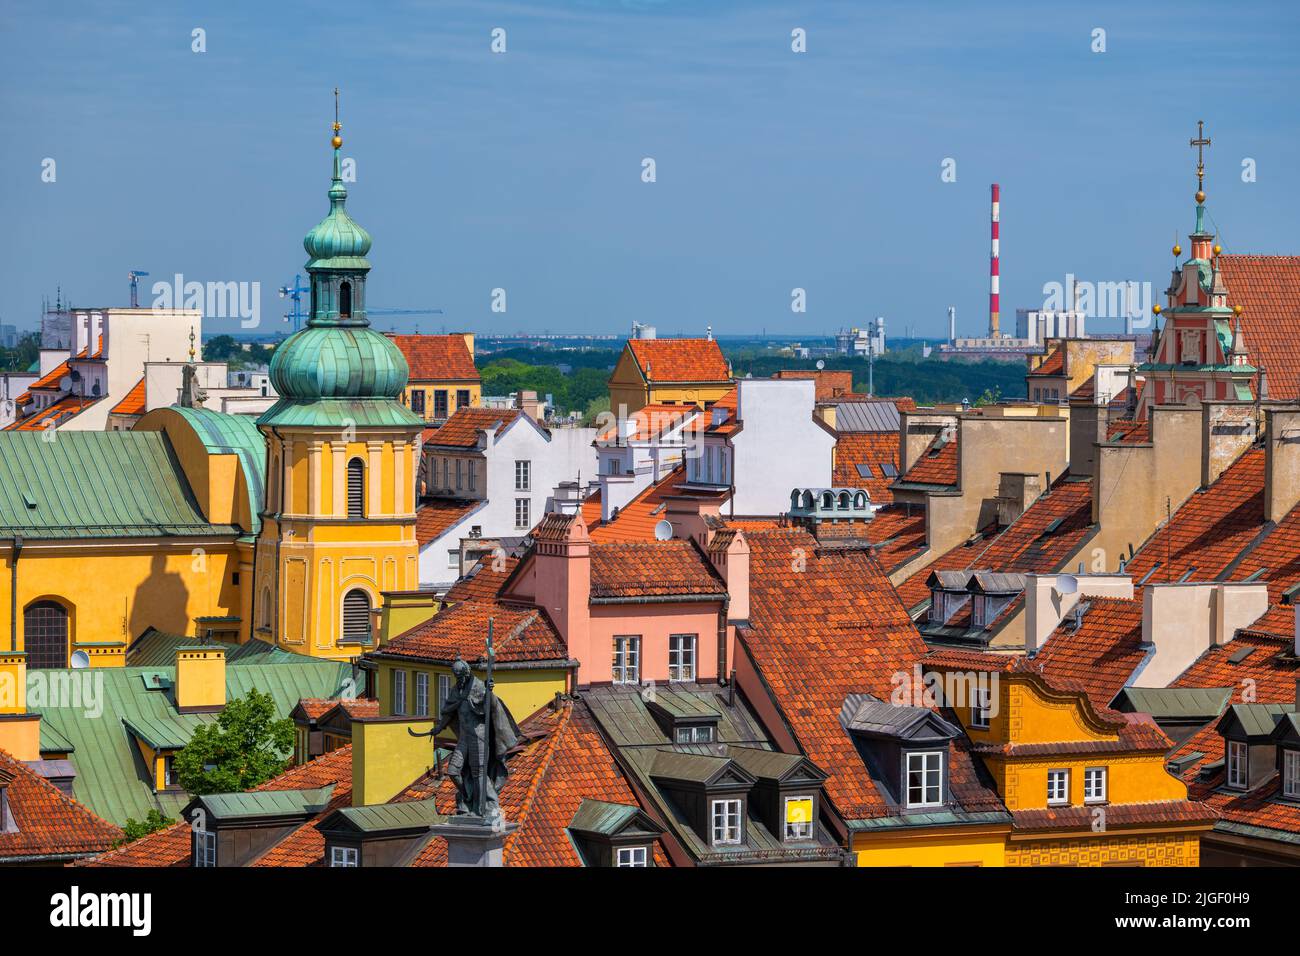 City of Warsaw in Poland, view over the rooftops of historic tenement houses in the Old Town. Stock Photo